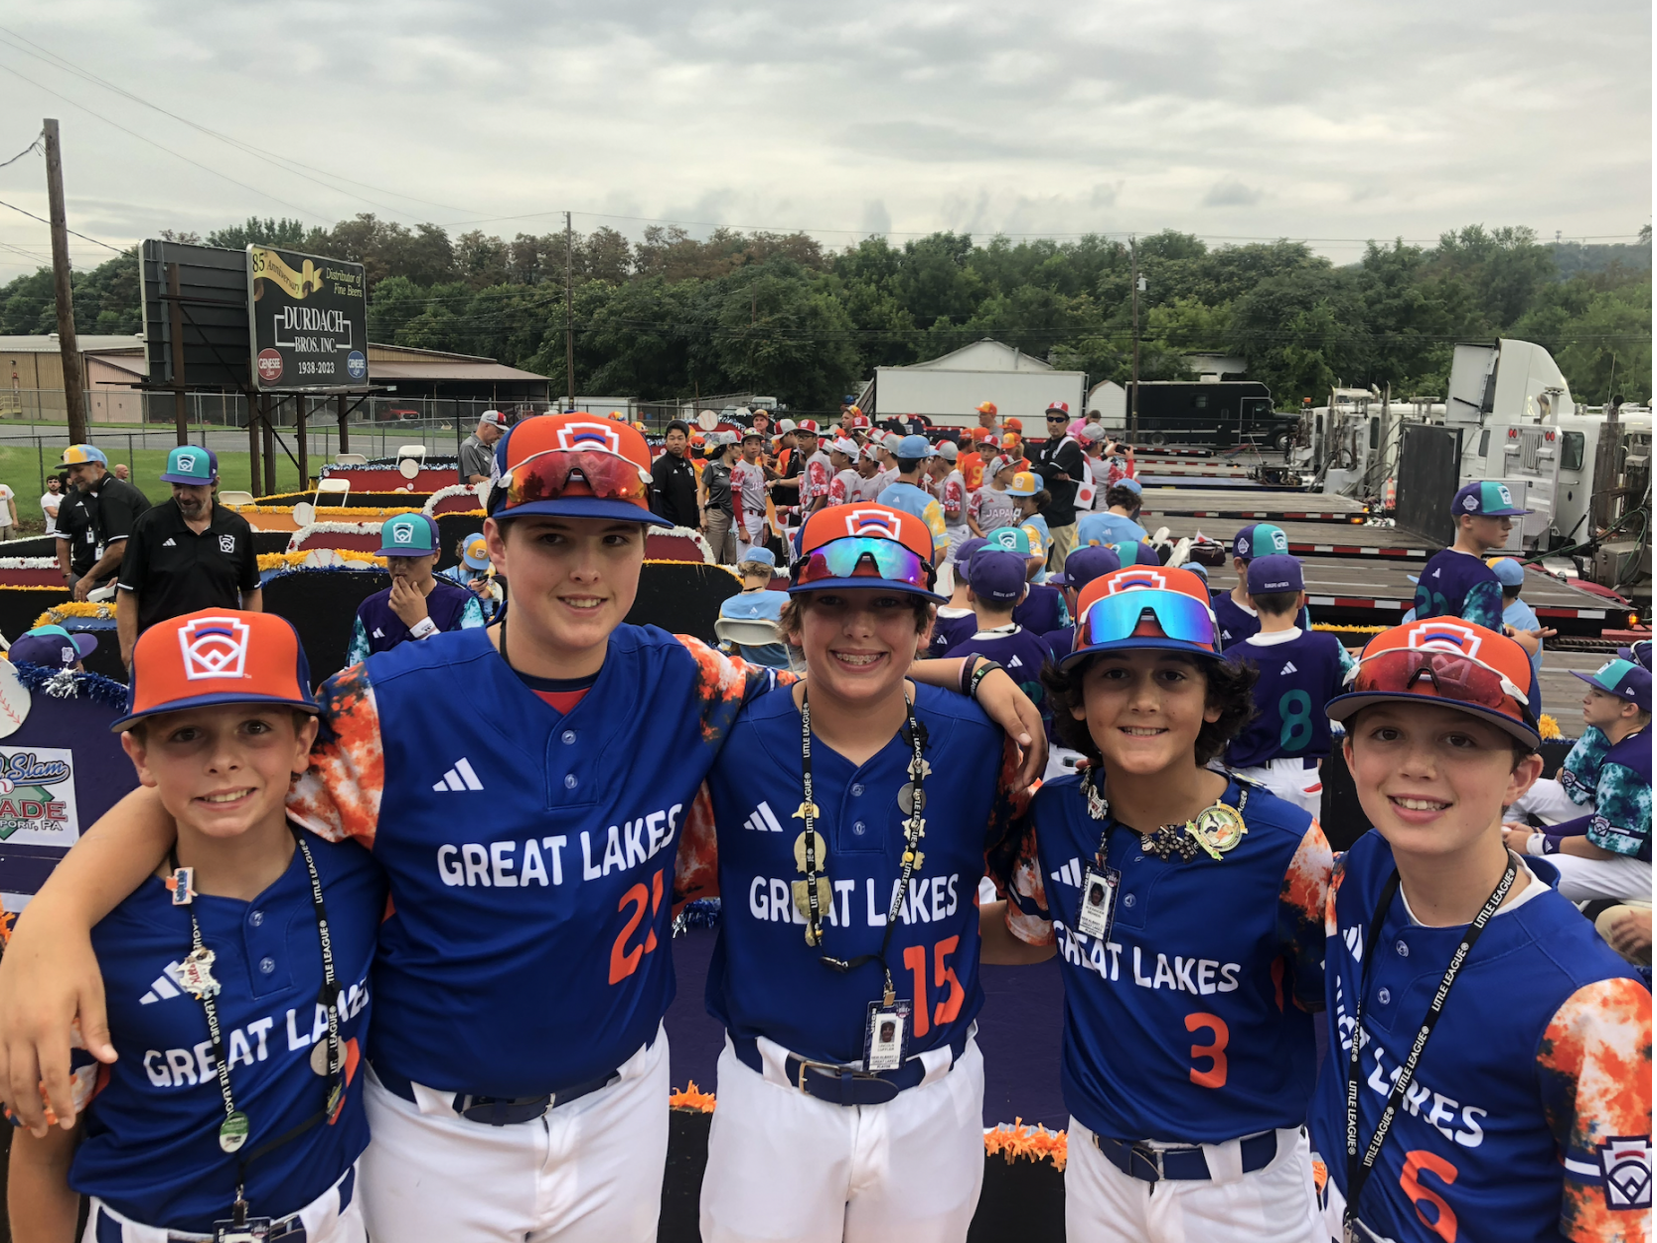 New Albany loses 4-3 in rain-shortened game at Little League World Series, Sports